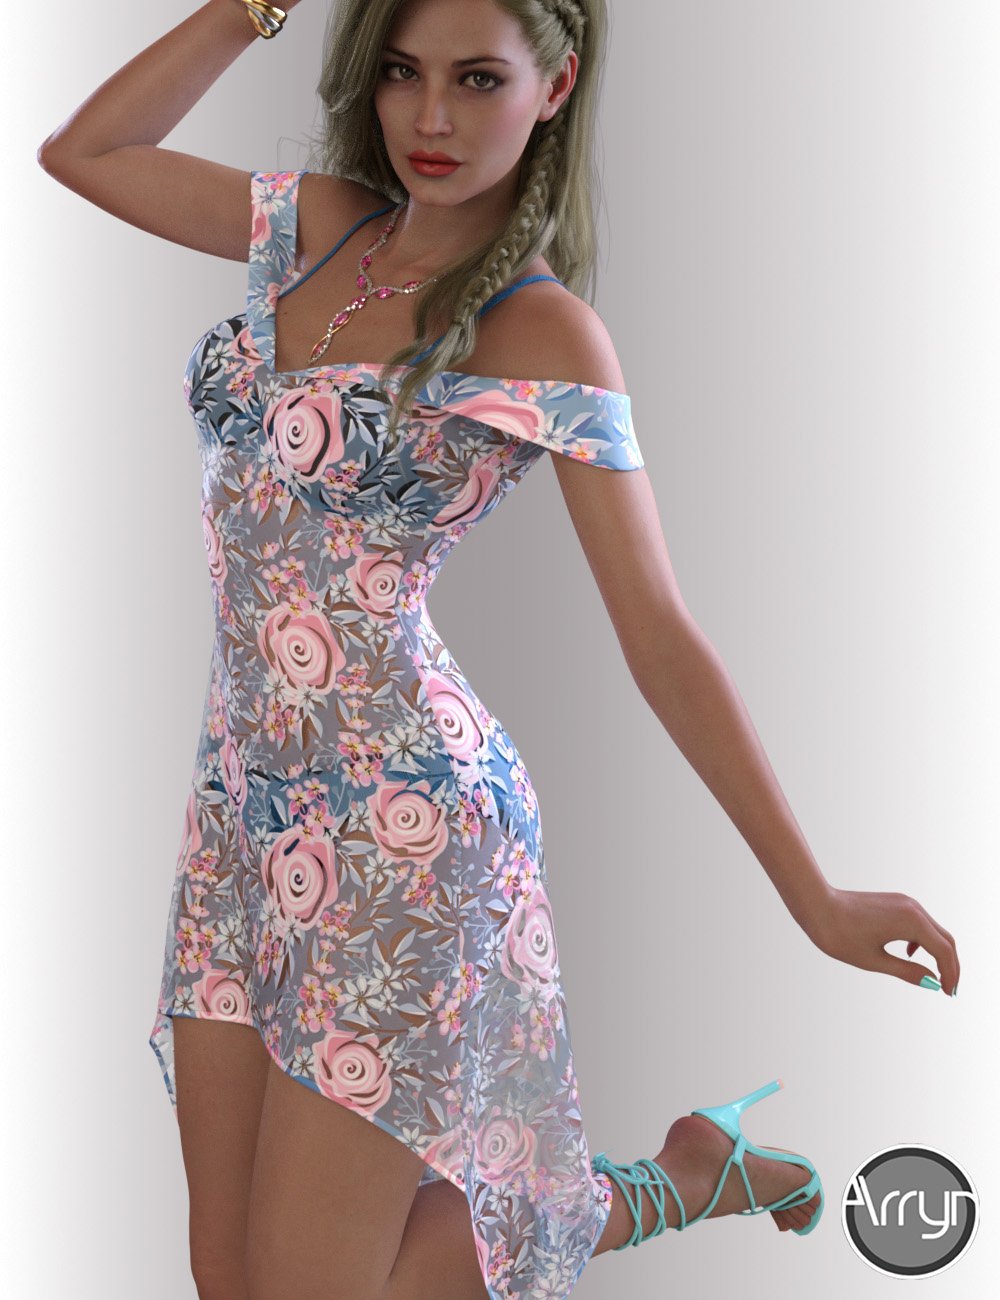 dForce Judy Outfit for Genesis 8 and 8.1 Females by: OnnelArryn, 3D Models by Daz 3D